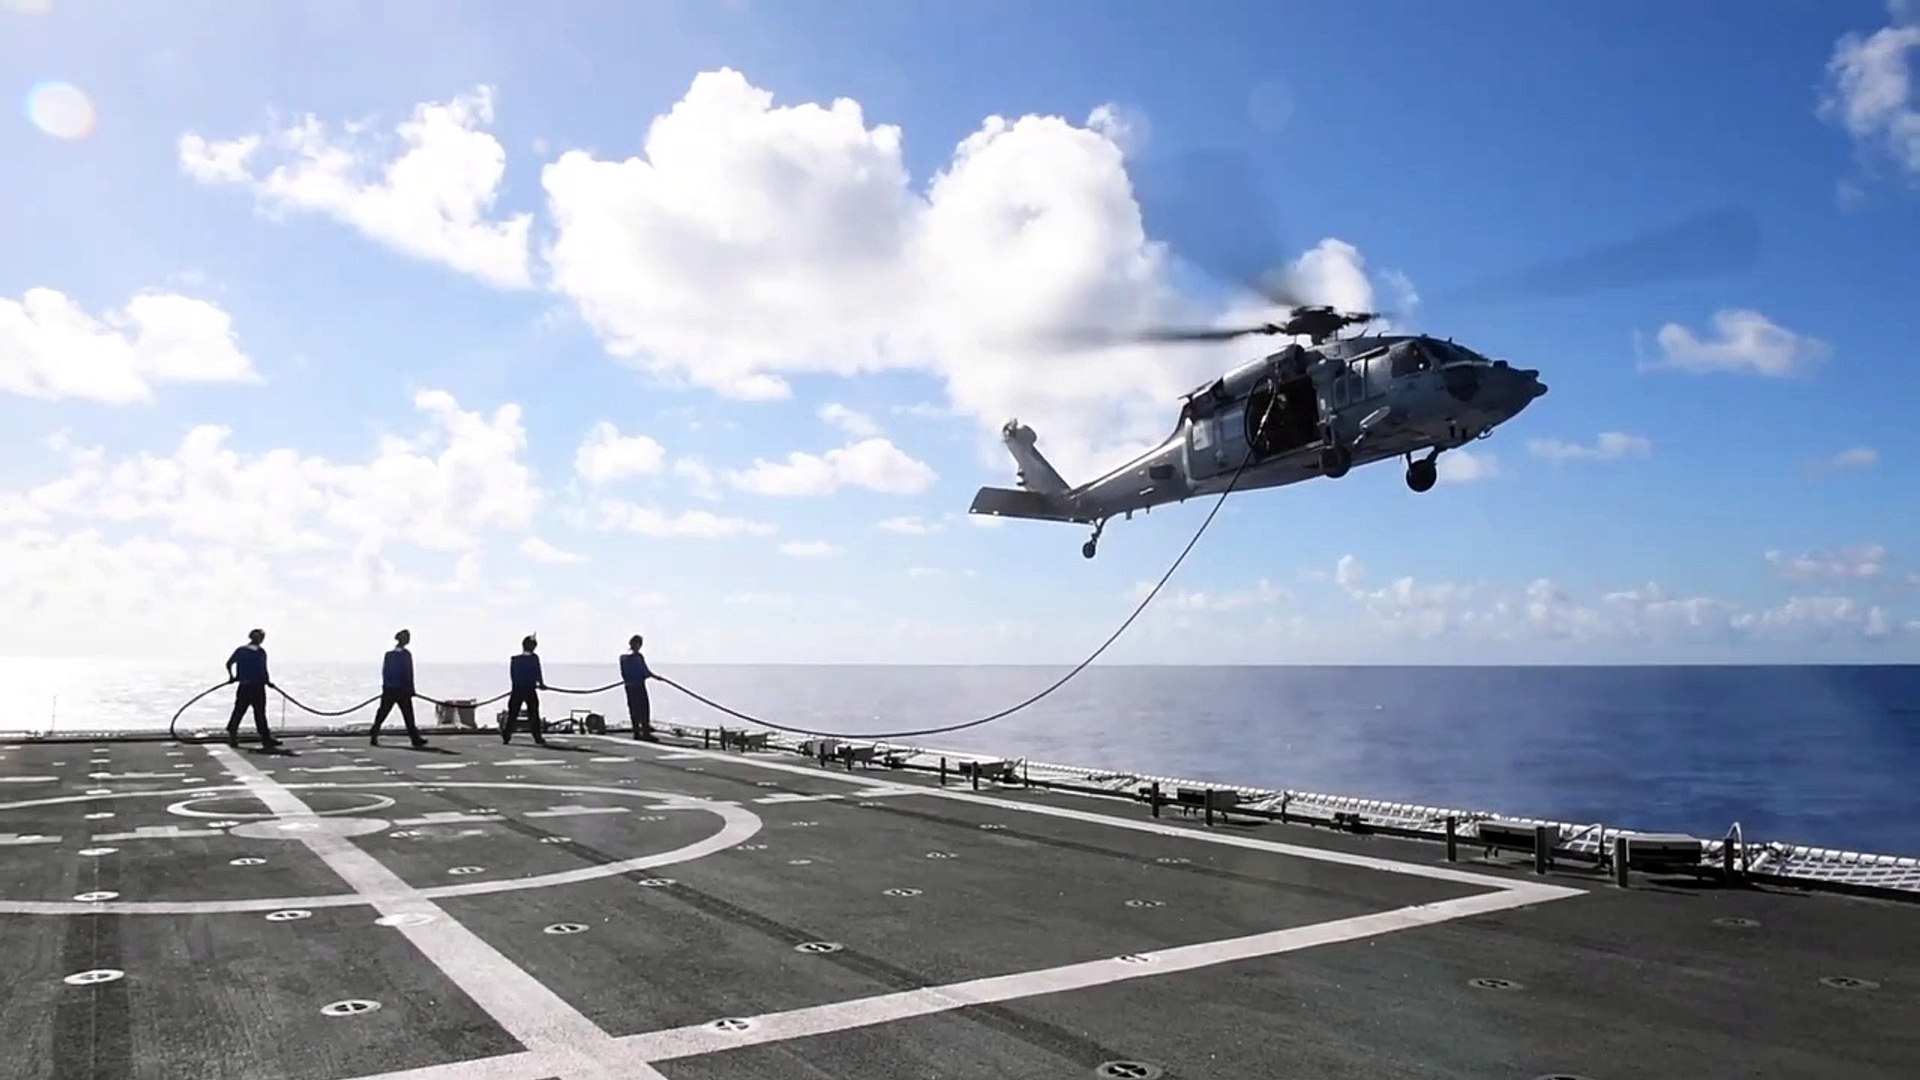 U.S Navy • MH-60S Sea Hawk Helicopter • (HIFR) USCGC Munro • Pacific Ocean • Aug. 17, 2020